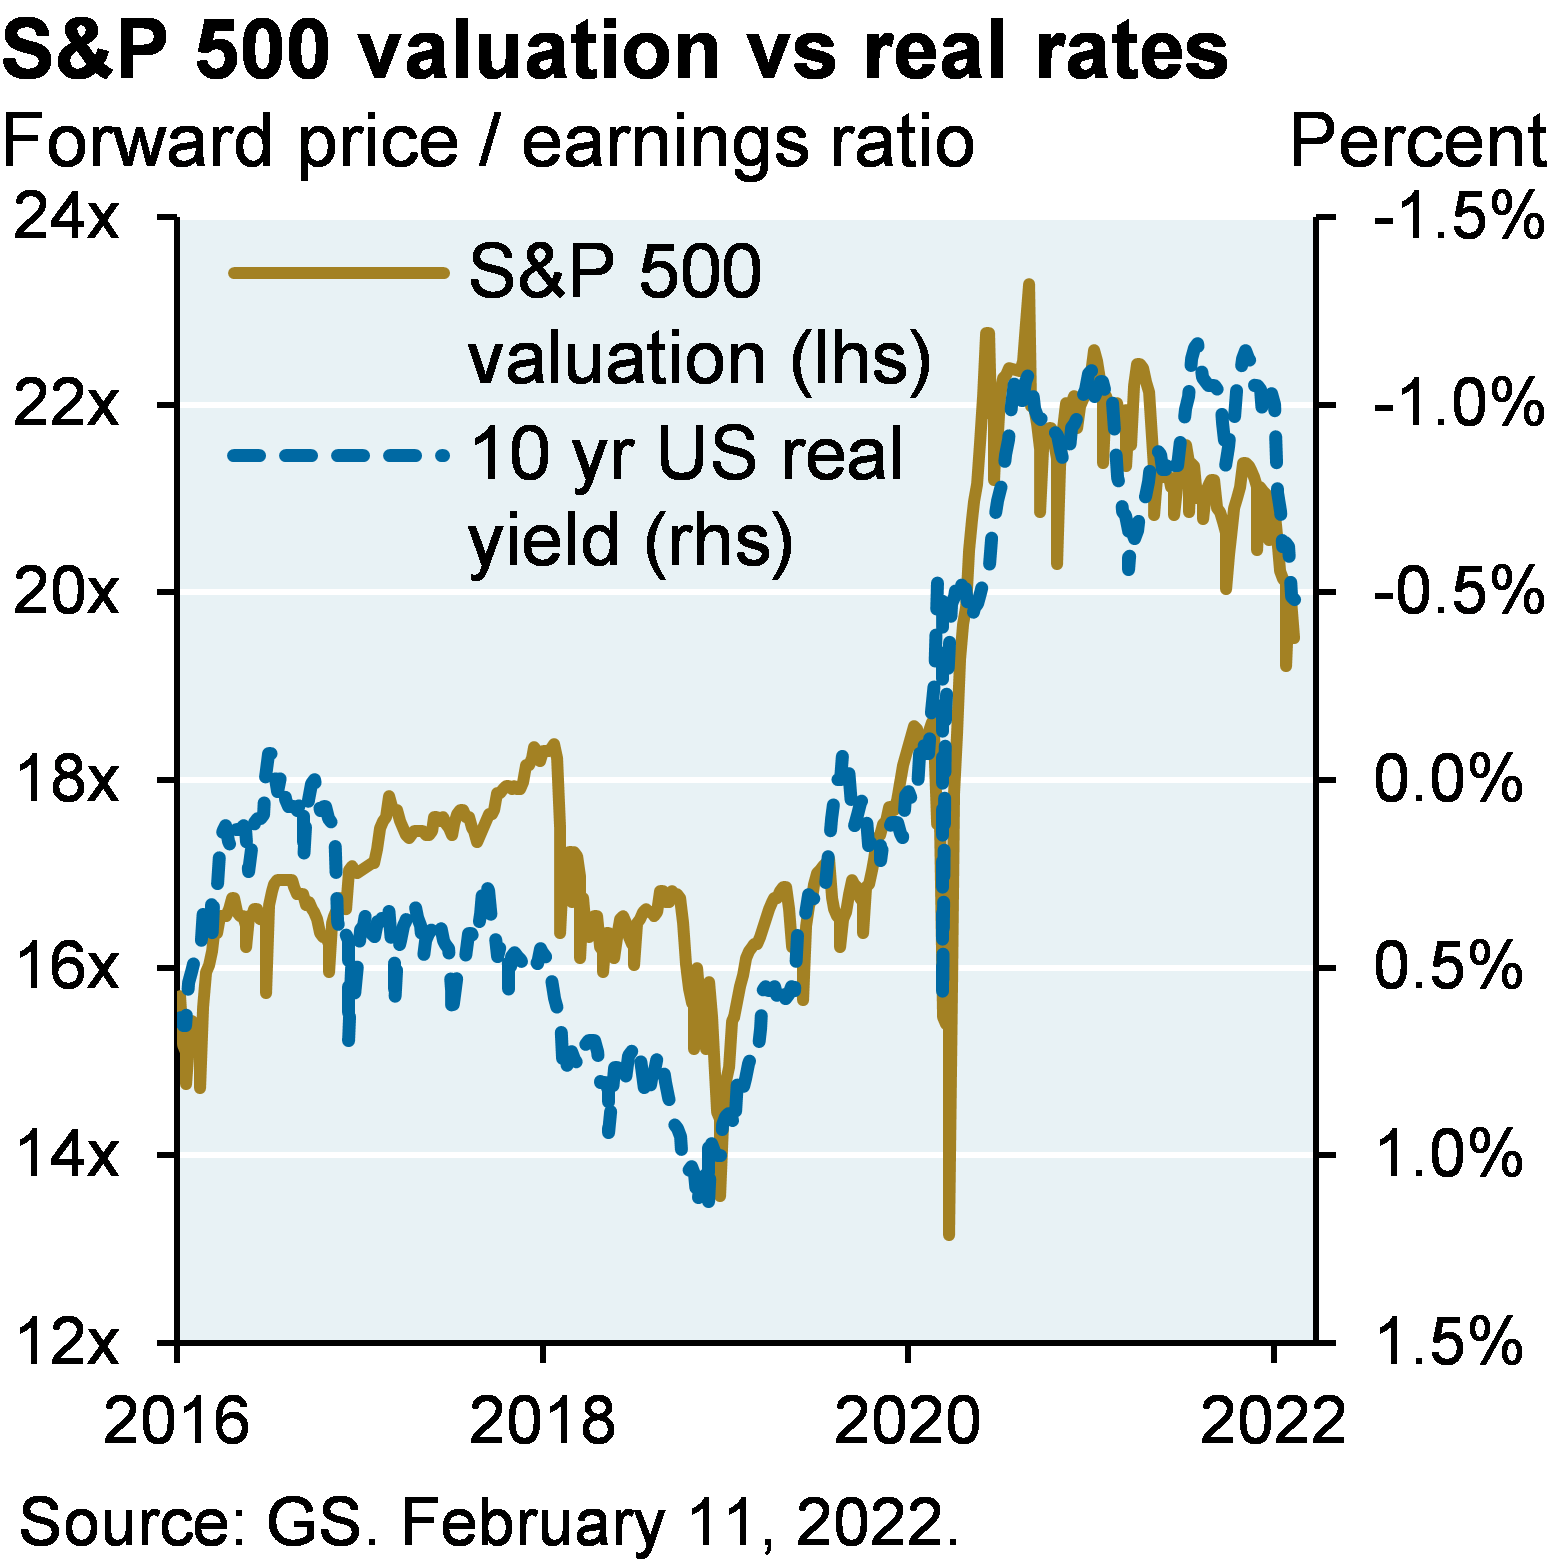 Line chart shows that S&P 500 forward P/E valuations have declined from peak levels along negative 10 year real interest rates; although to be clear, valuations are still high in any historical context